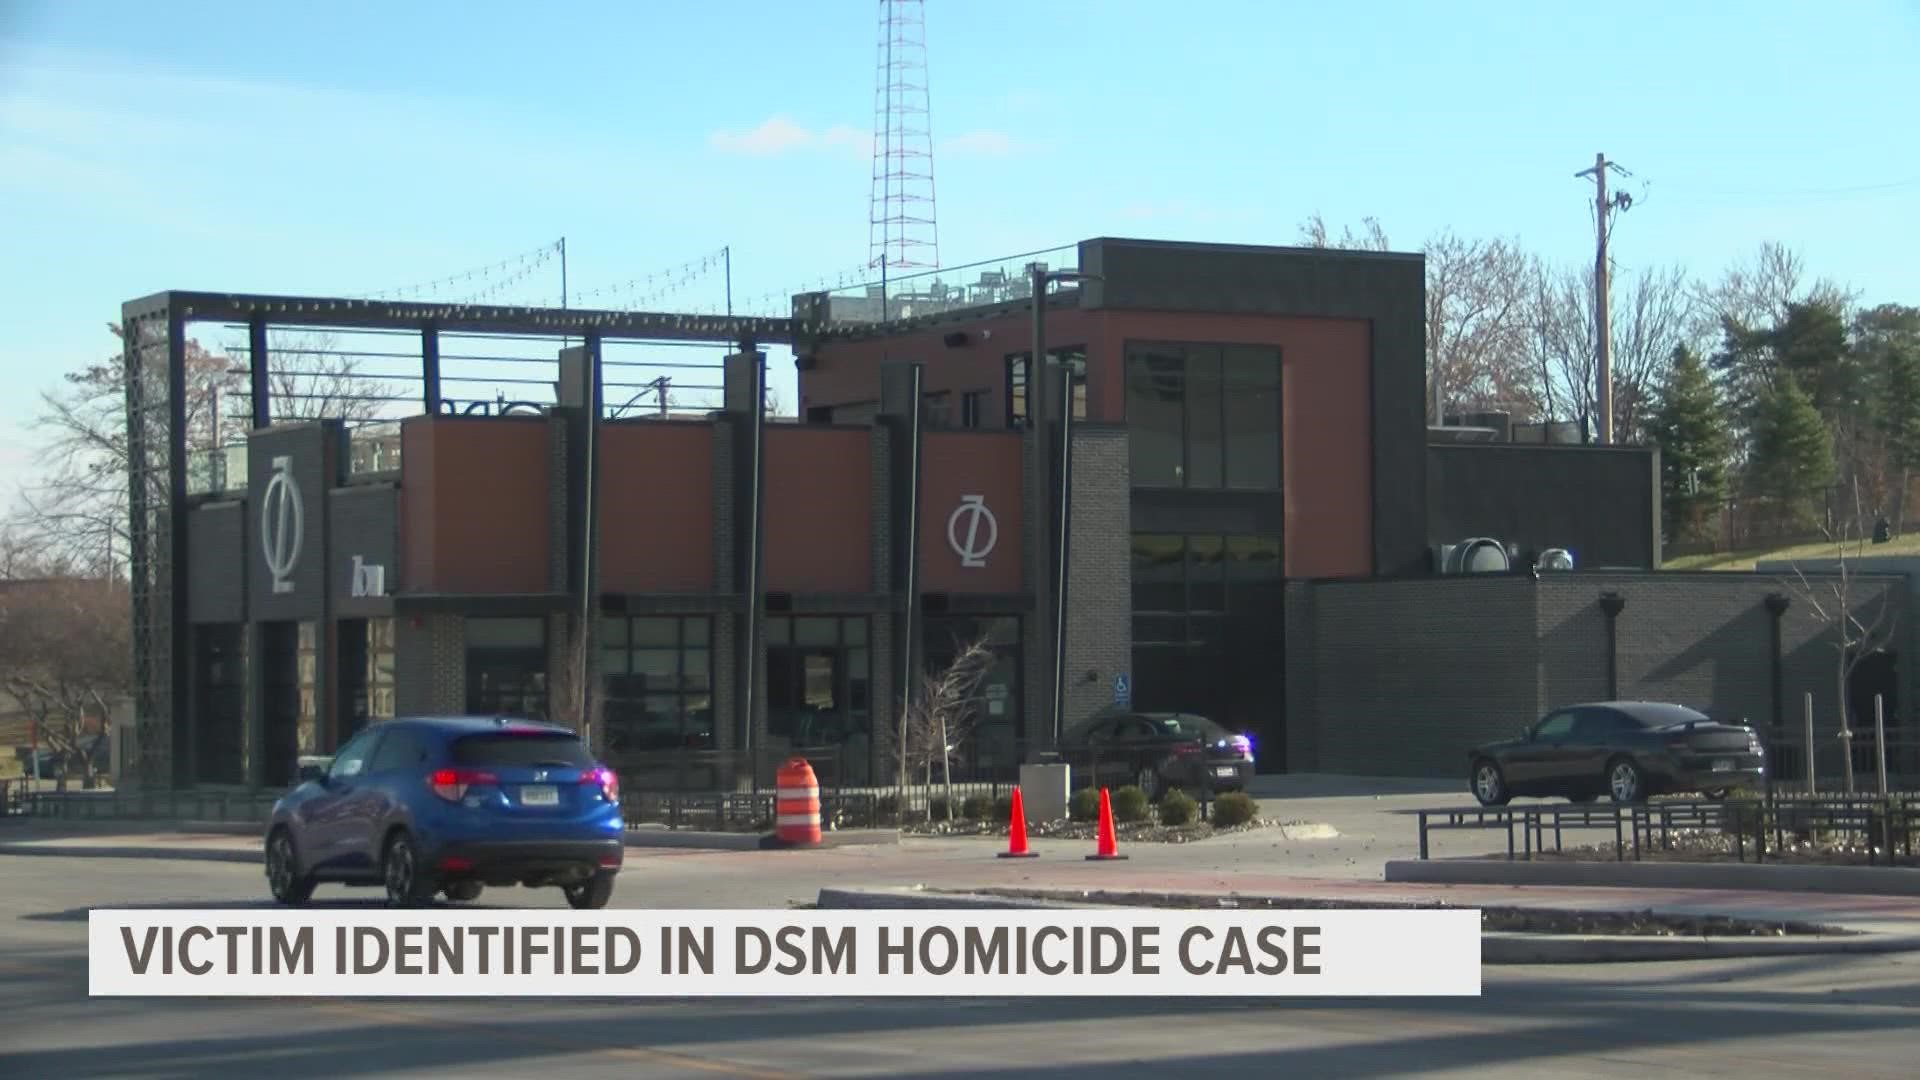 DMPD says this is the city's 16th homicide of 2022.